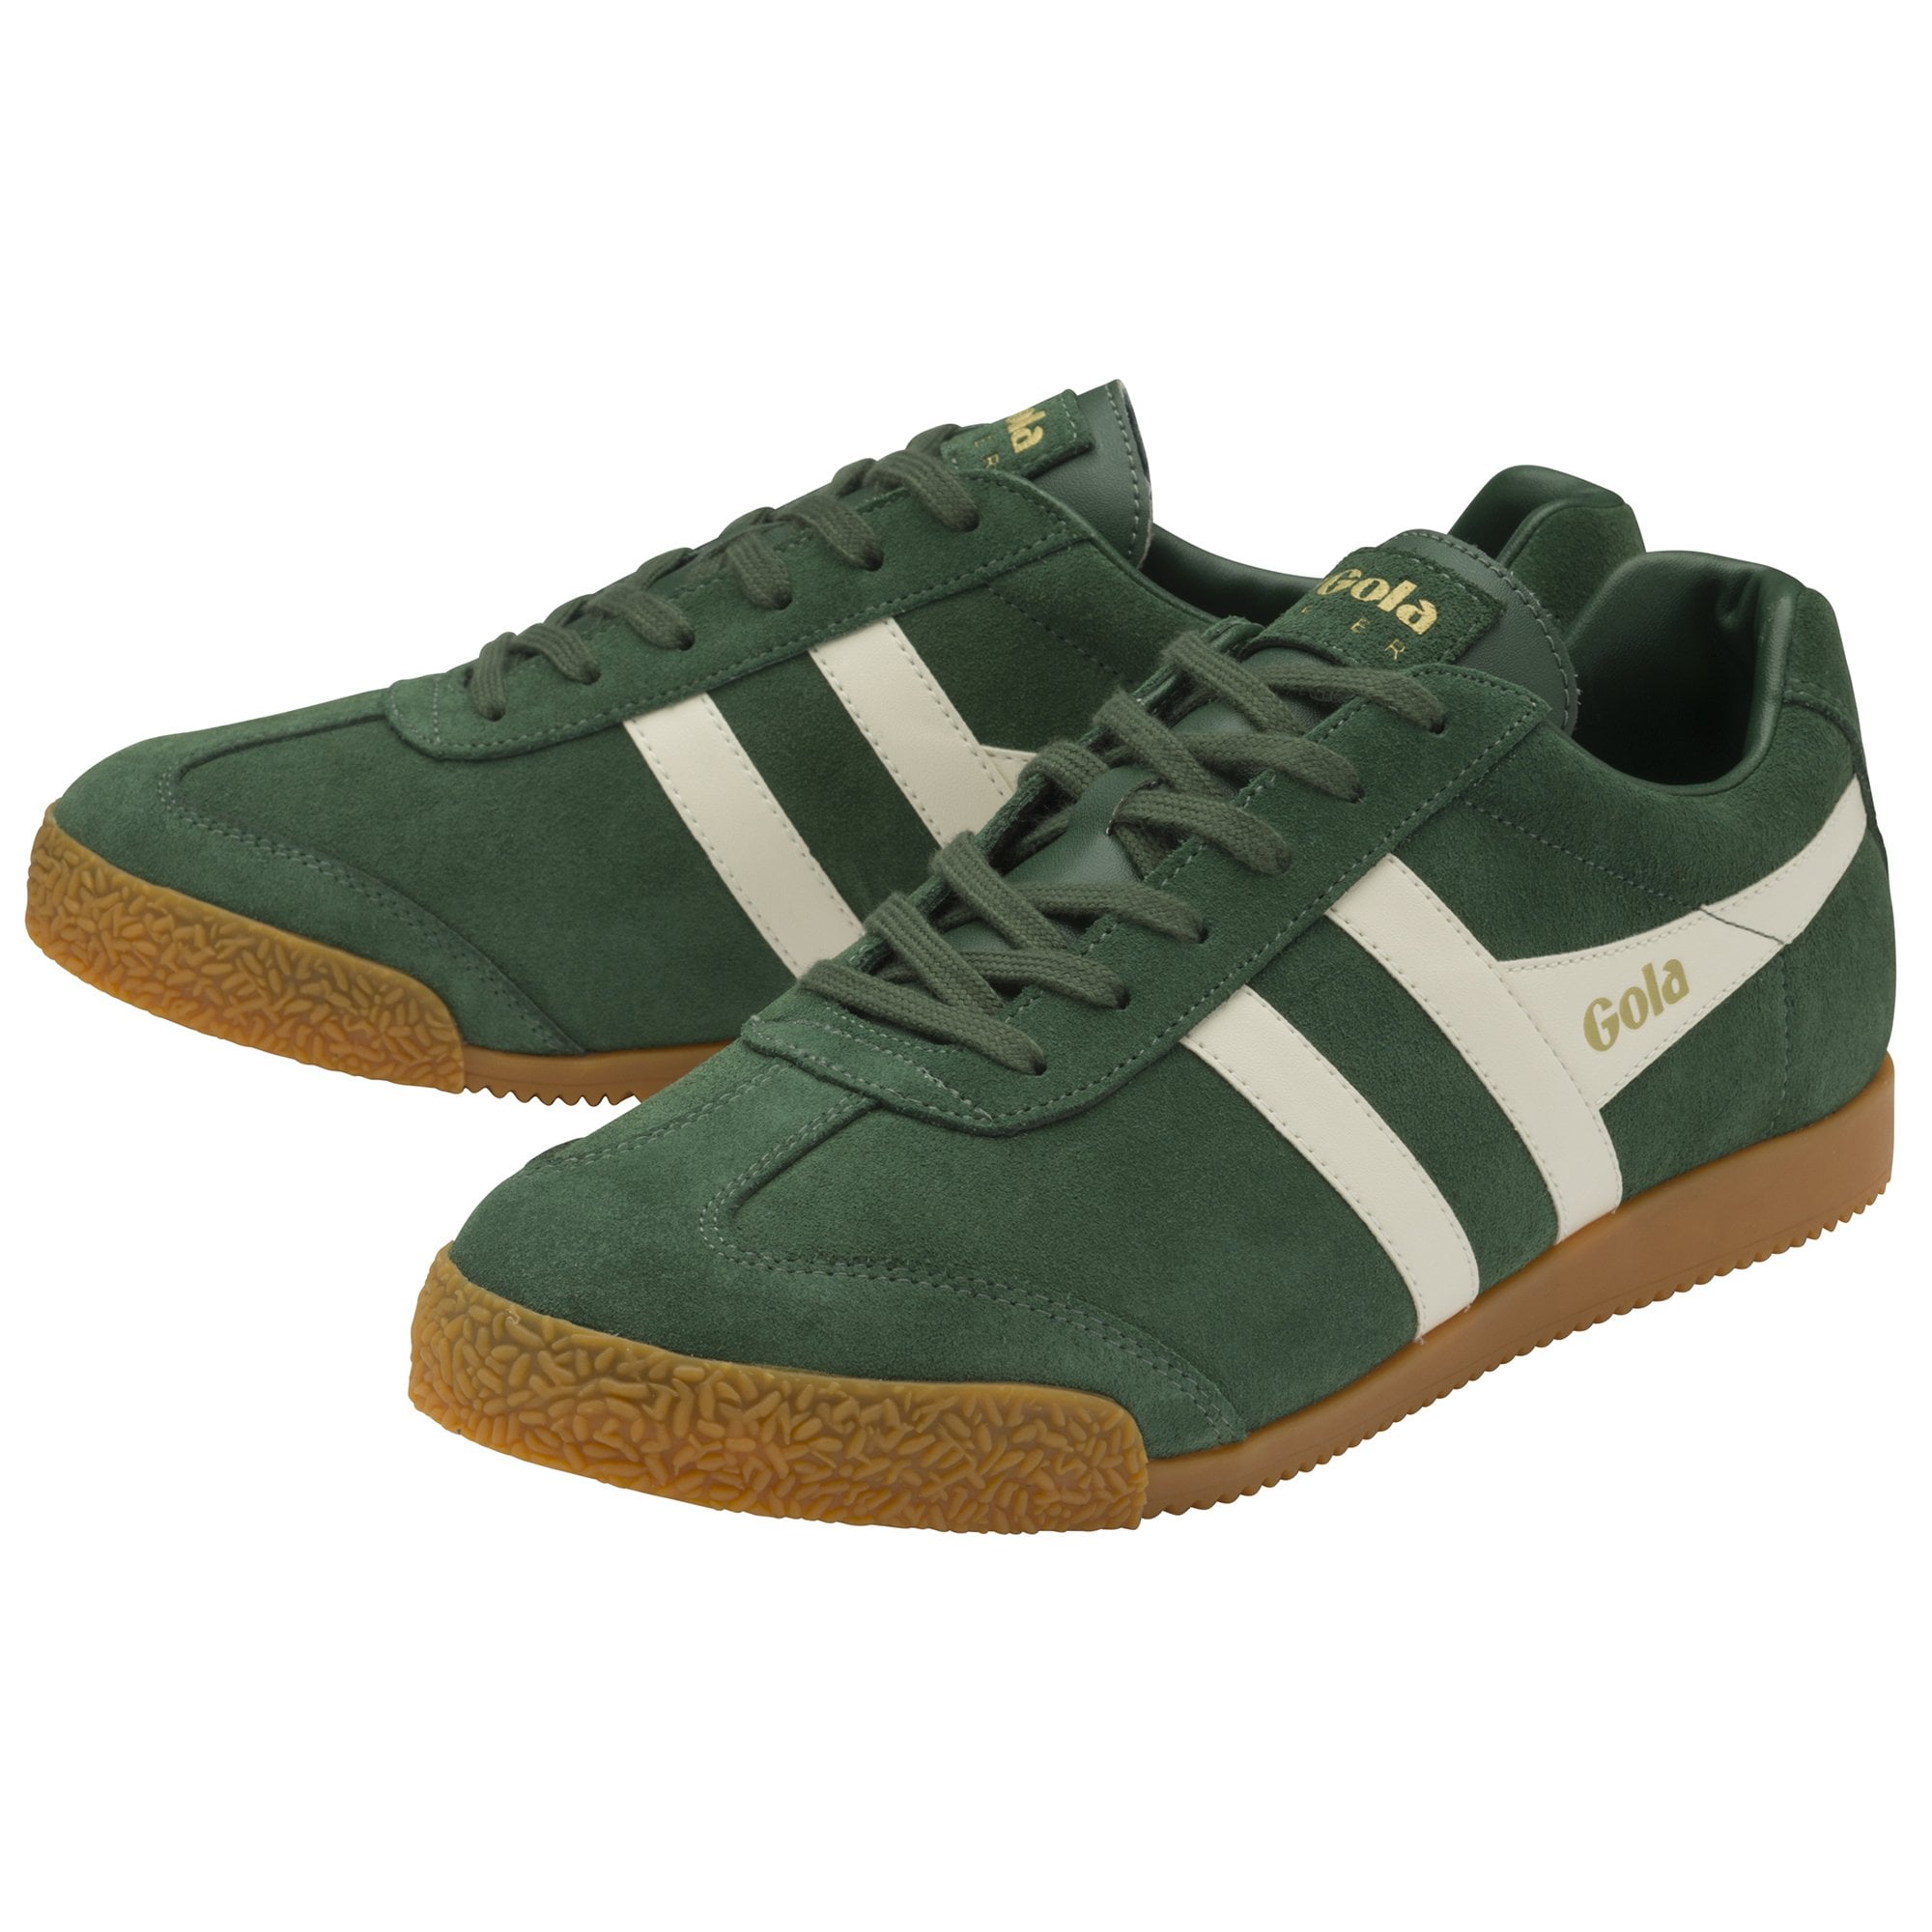 GOLA CLASSIC WOMEN'S HARRIER SUEDE TRAINERS, Evergreen/Off White